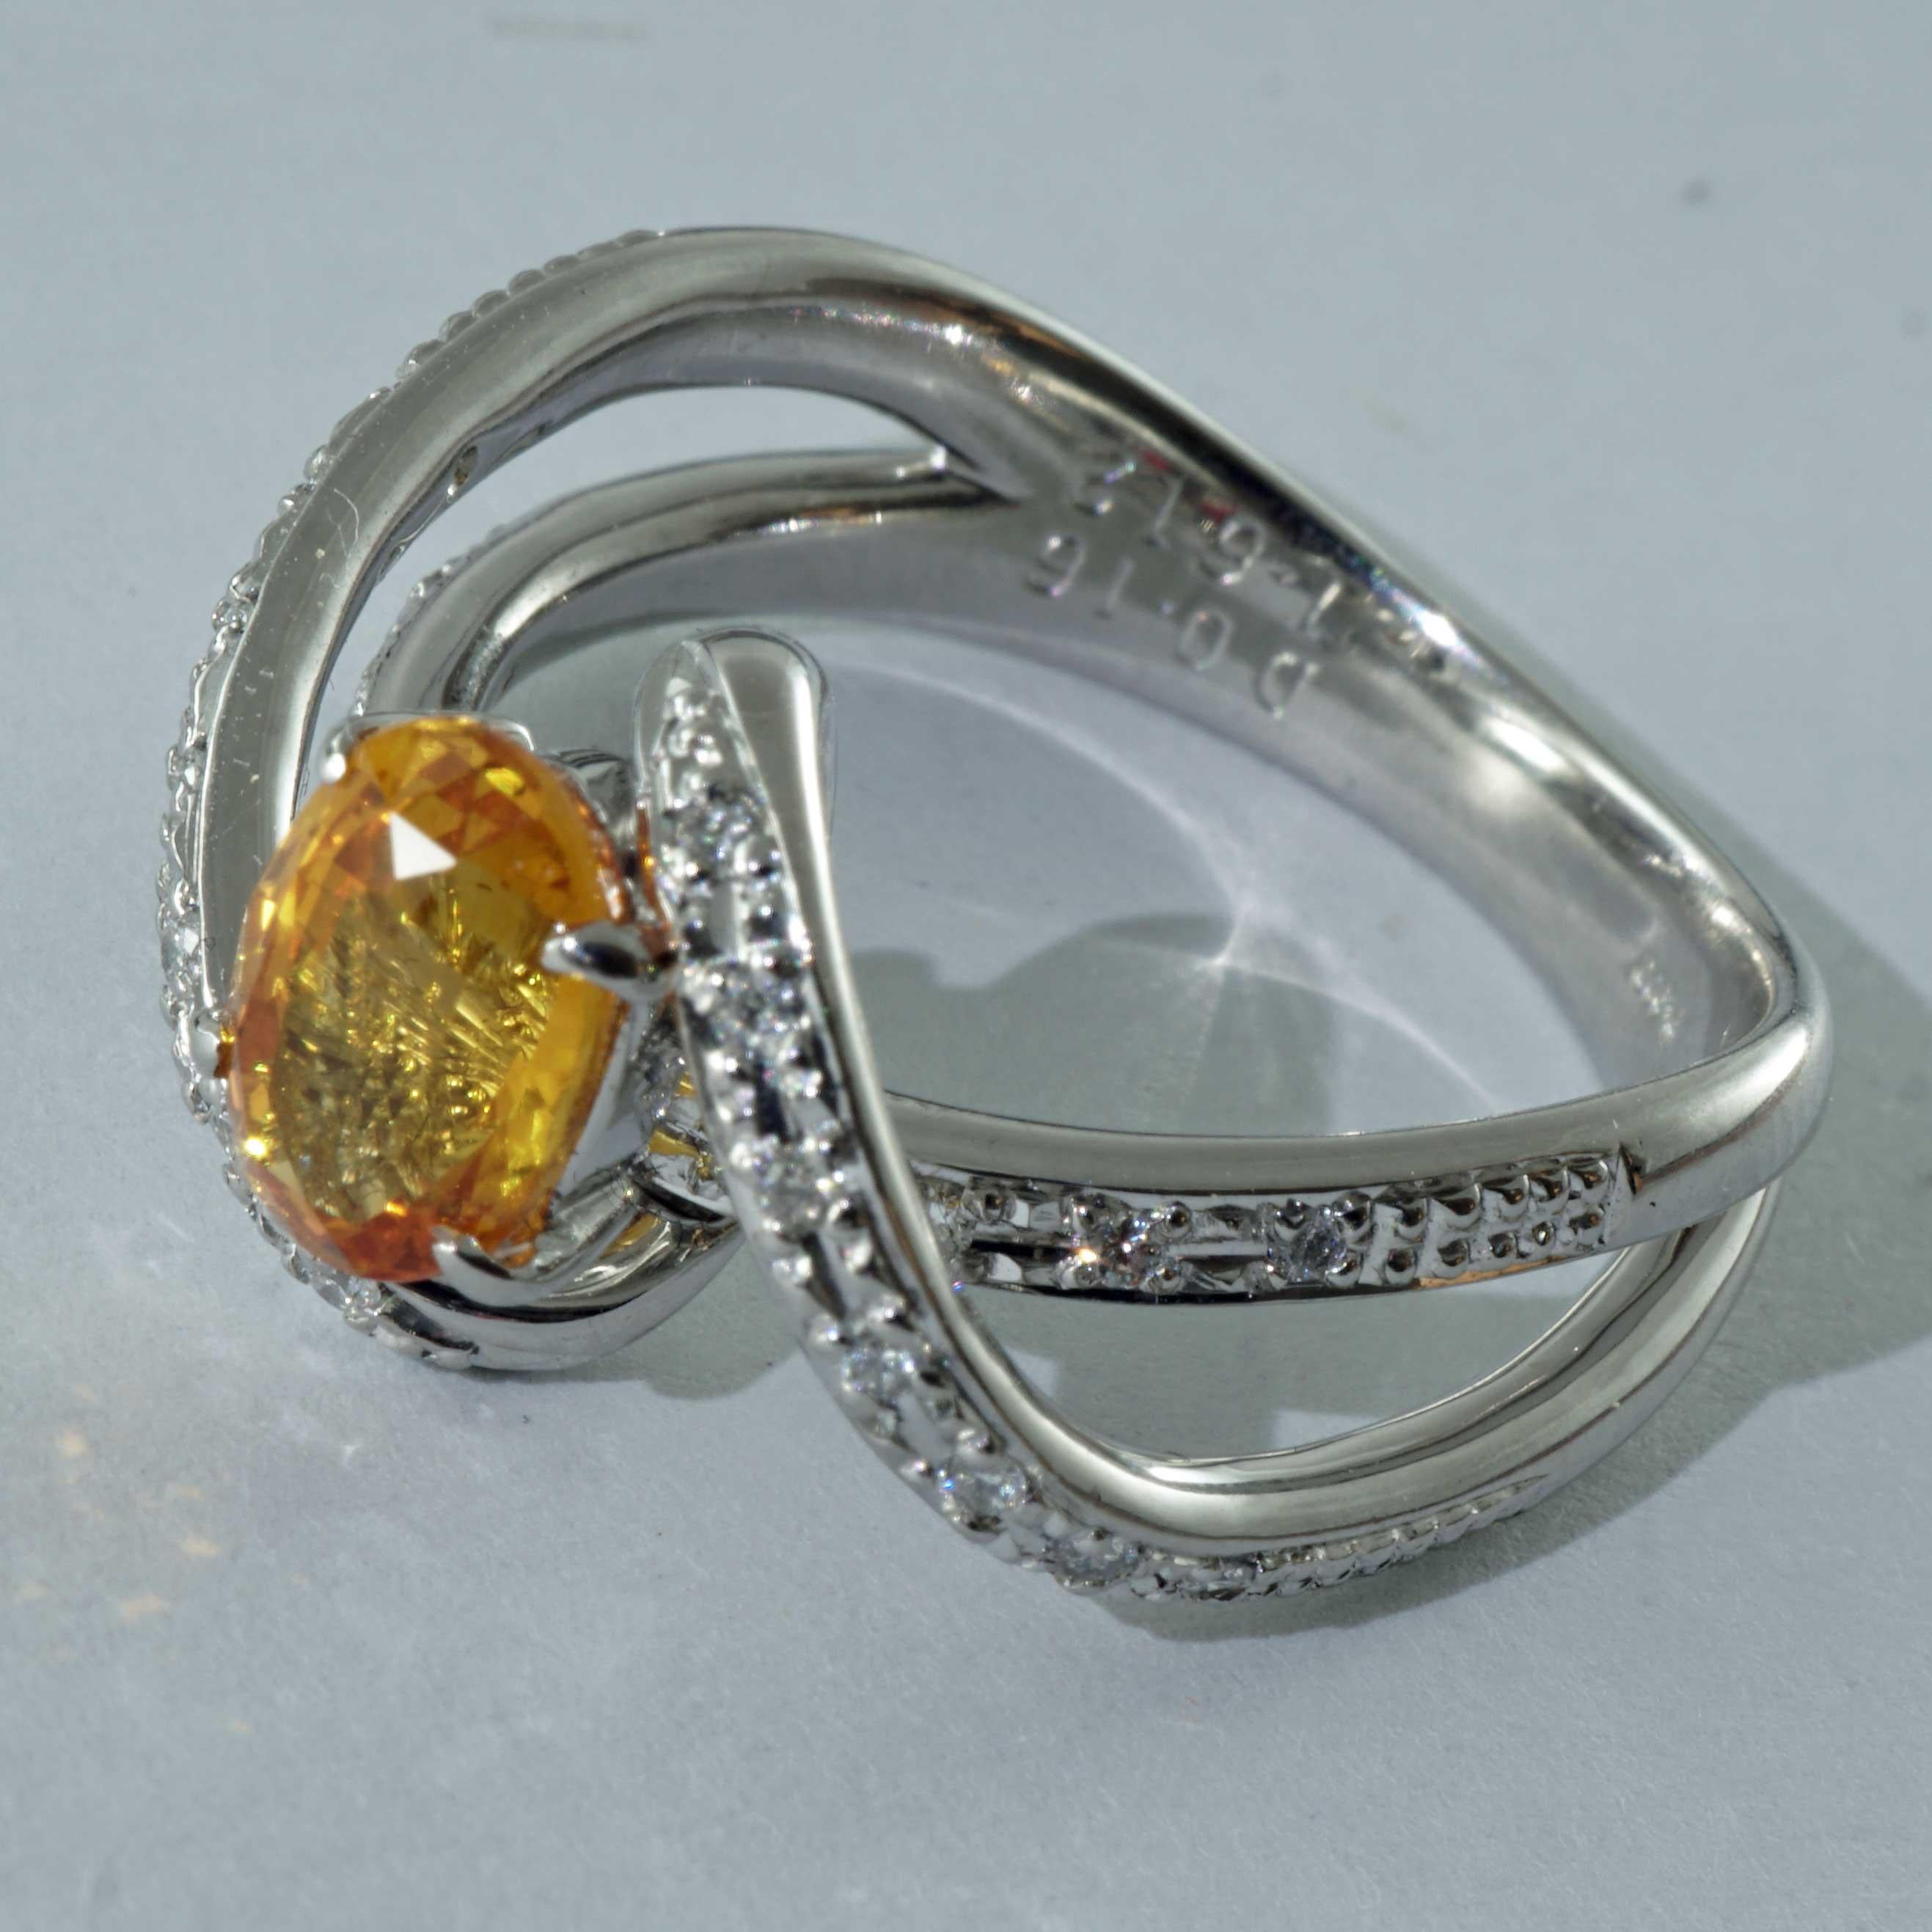 Women's or Men's 1.6 ct Yellow Saphire Brilliant Ring Platinum wonderful symbolic Color very good For Sale